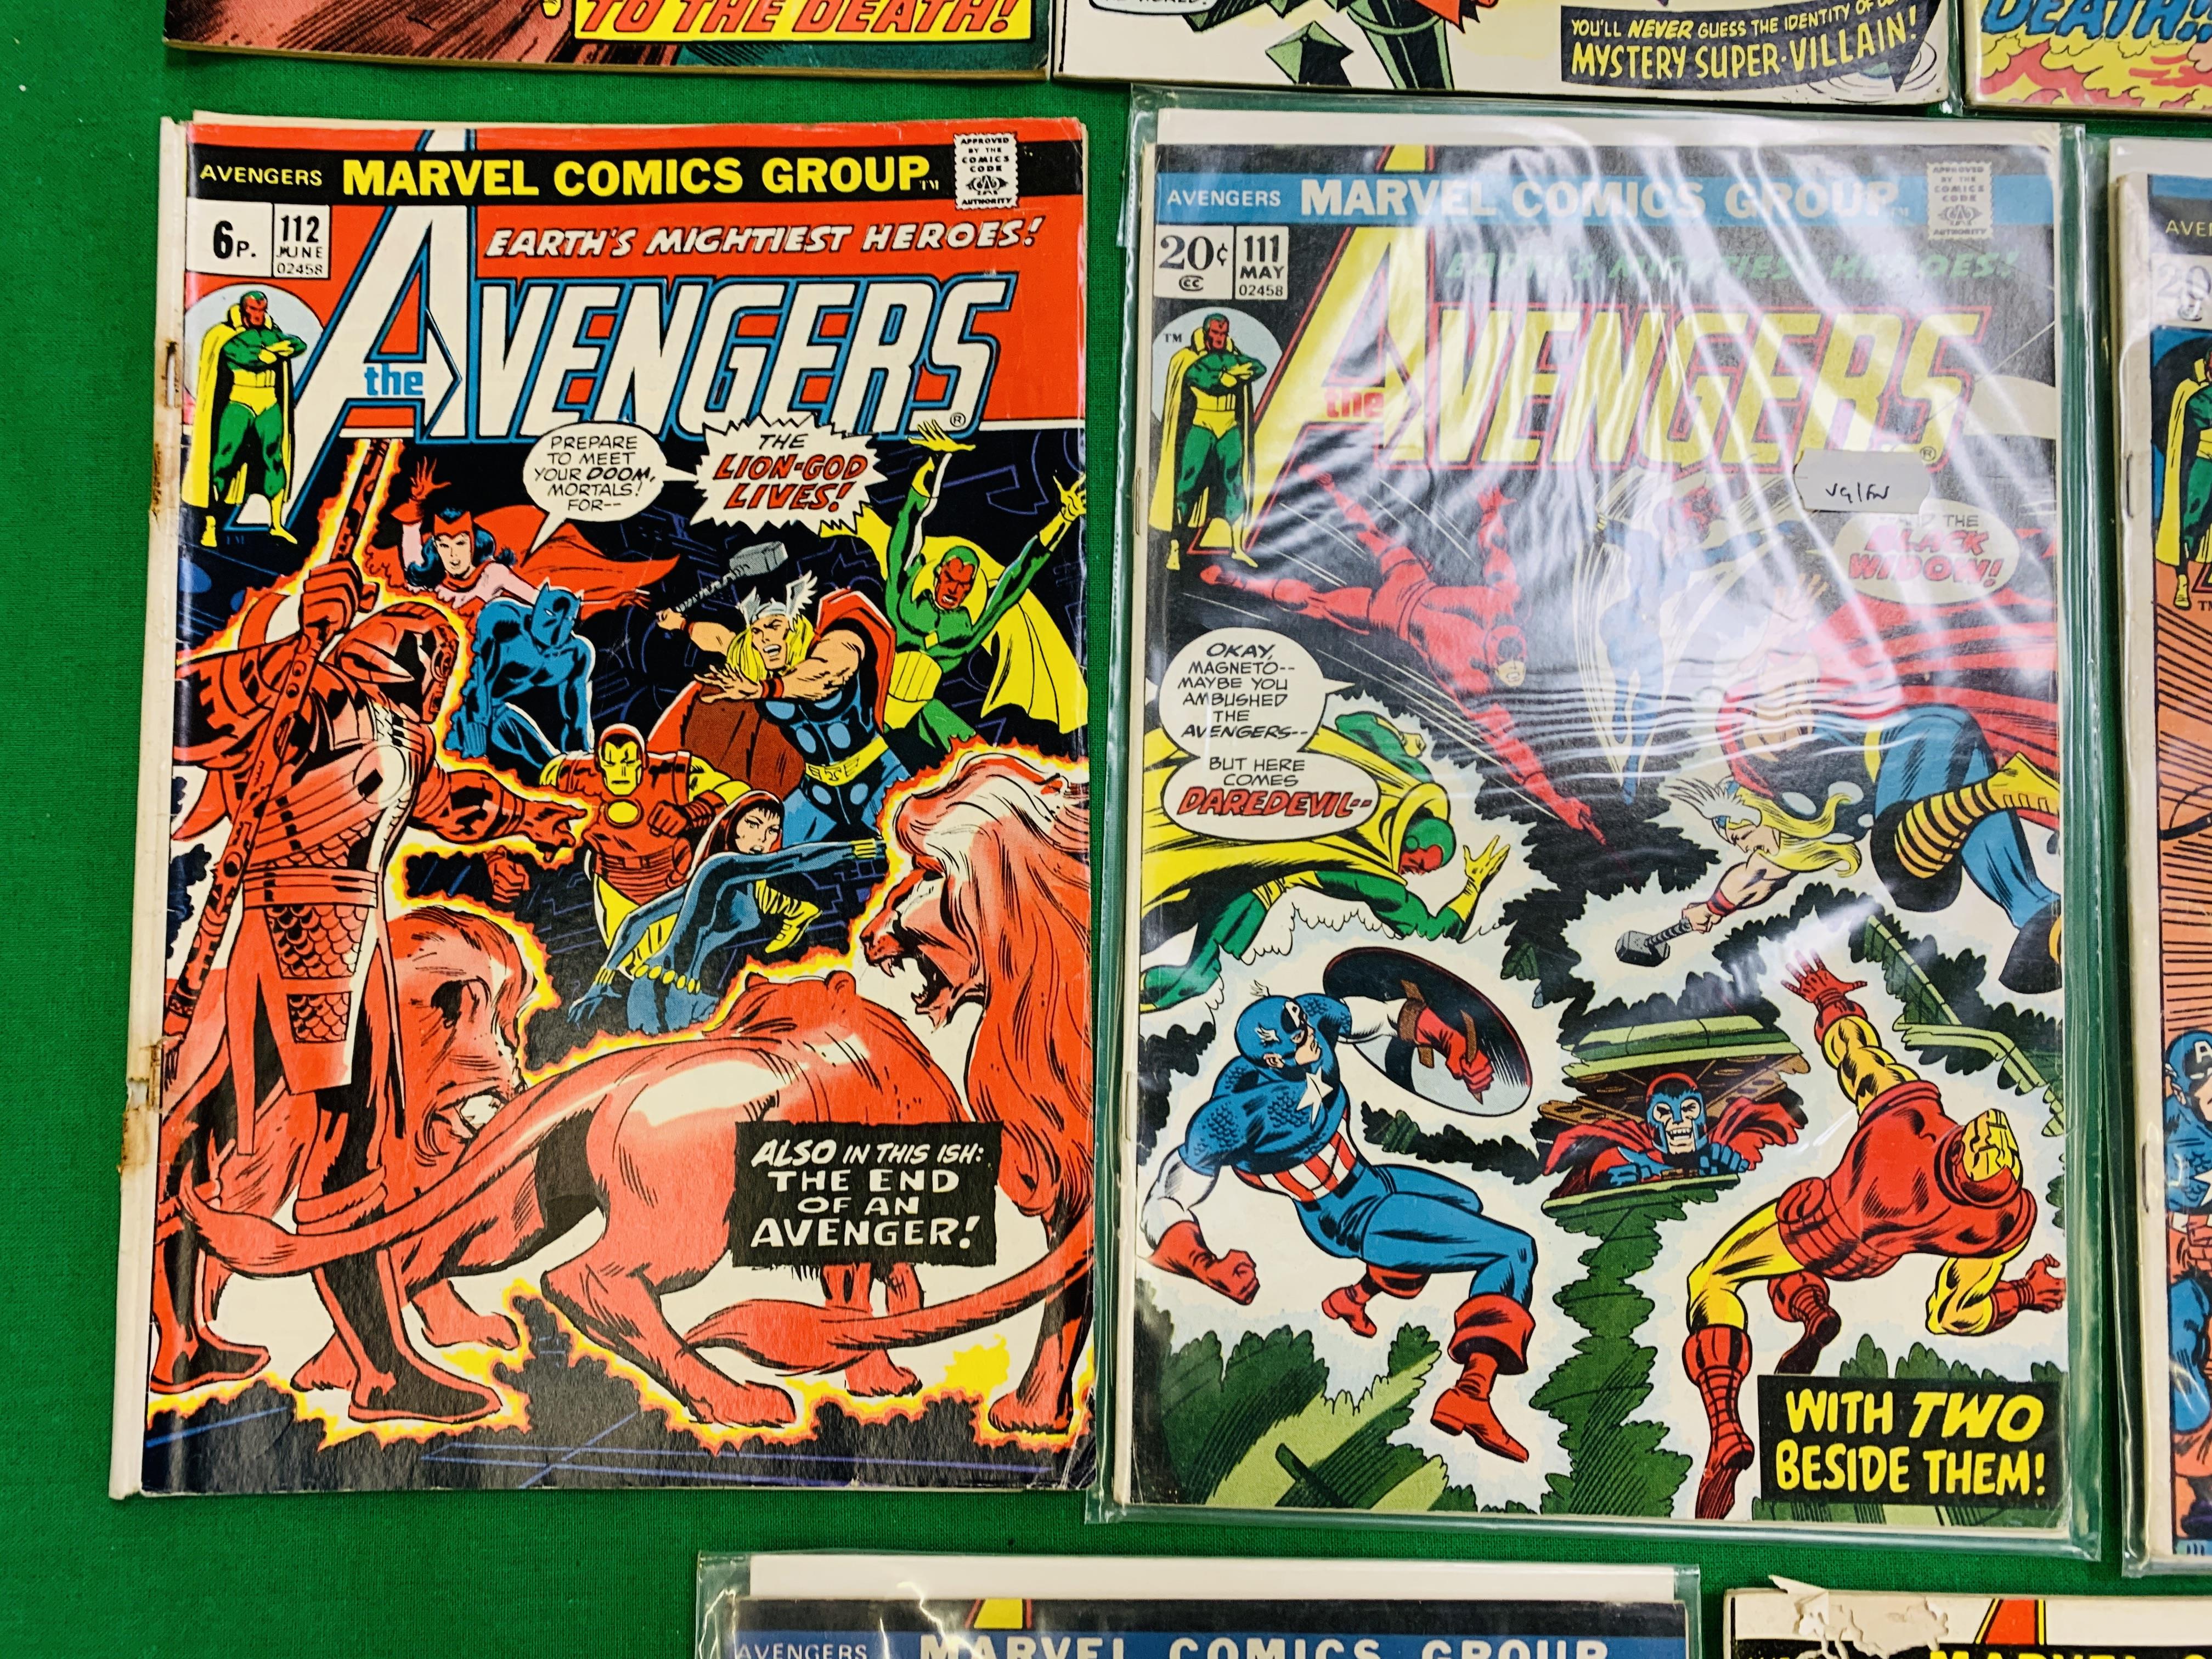 MARVEL COMICS THE AVENGERS NO. 101 - 299, MISSING ISSUES 103 AND 110. - Image 4 of 130